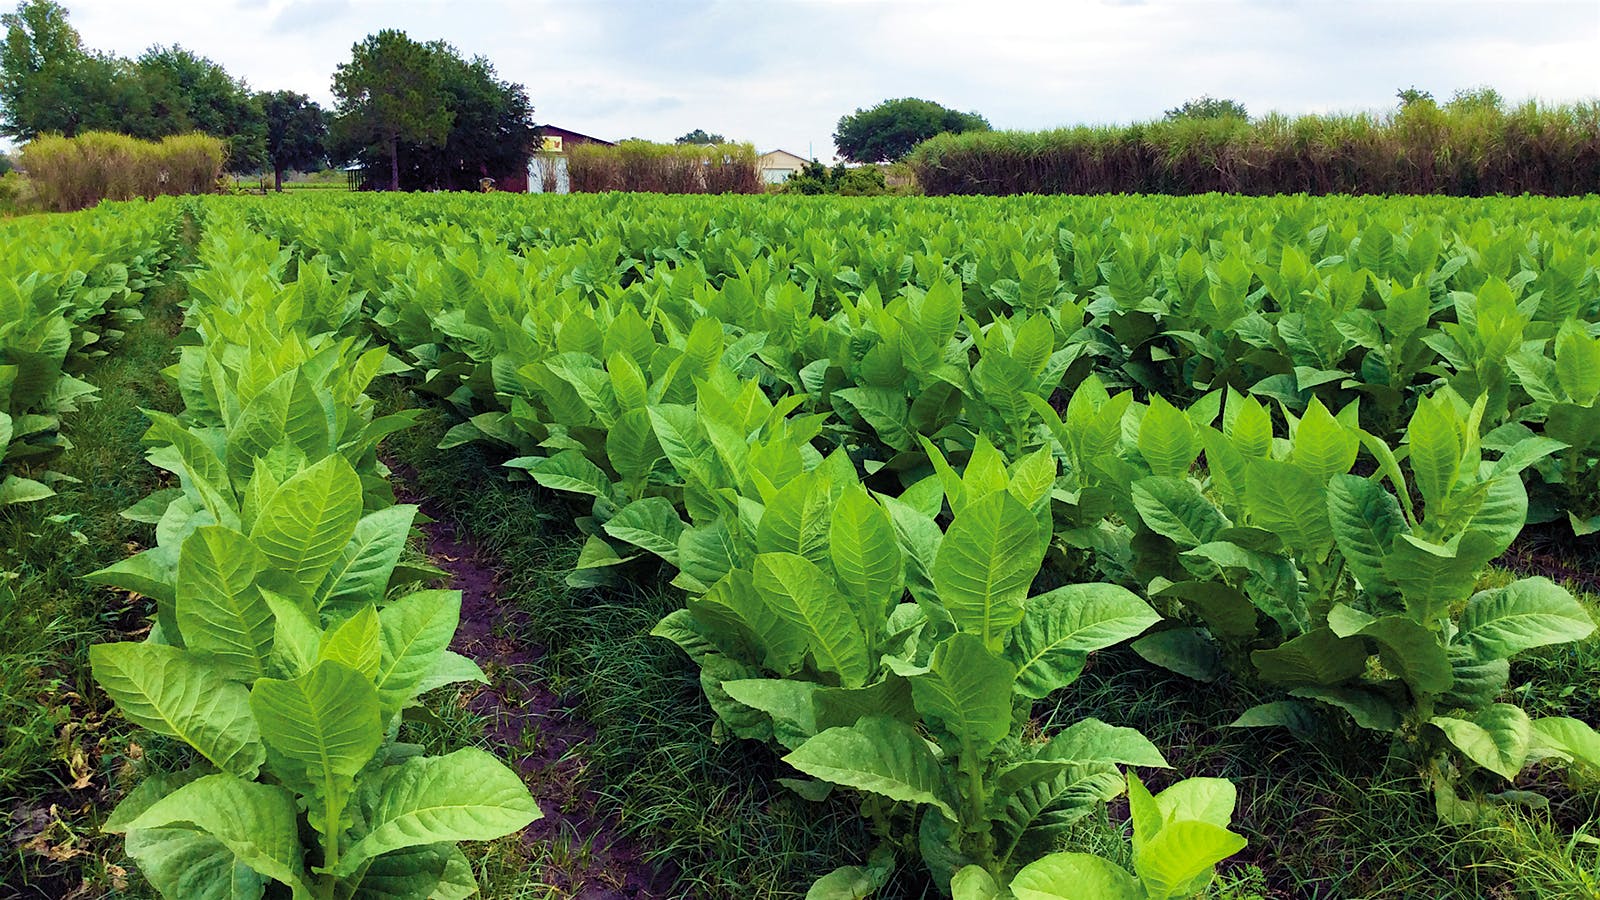 A tobacco field in Clermont, Florida.